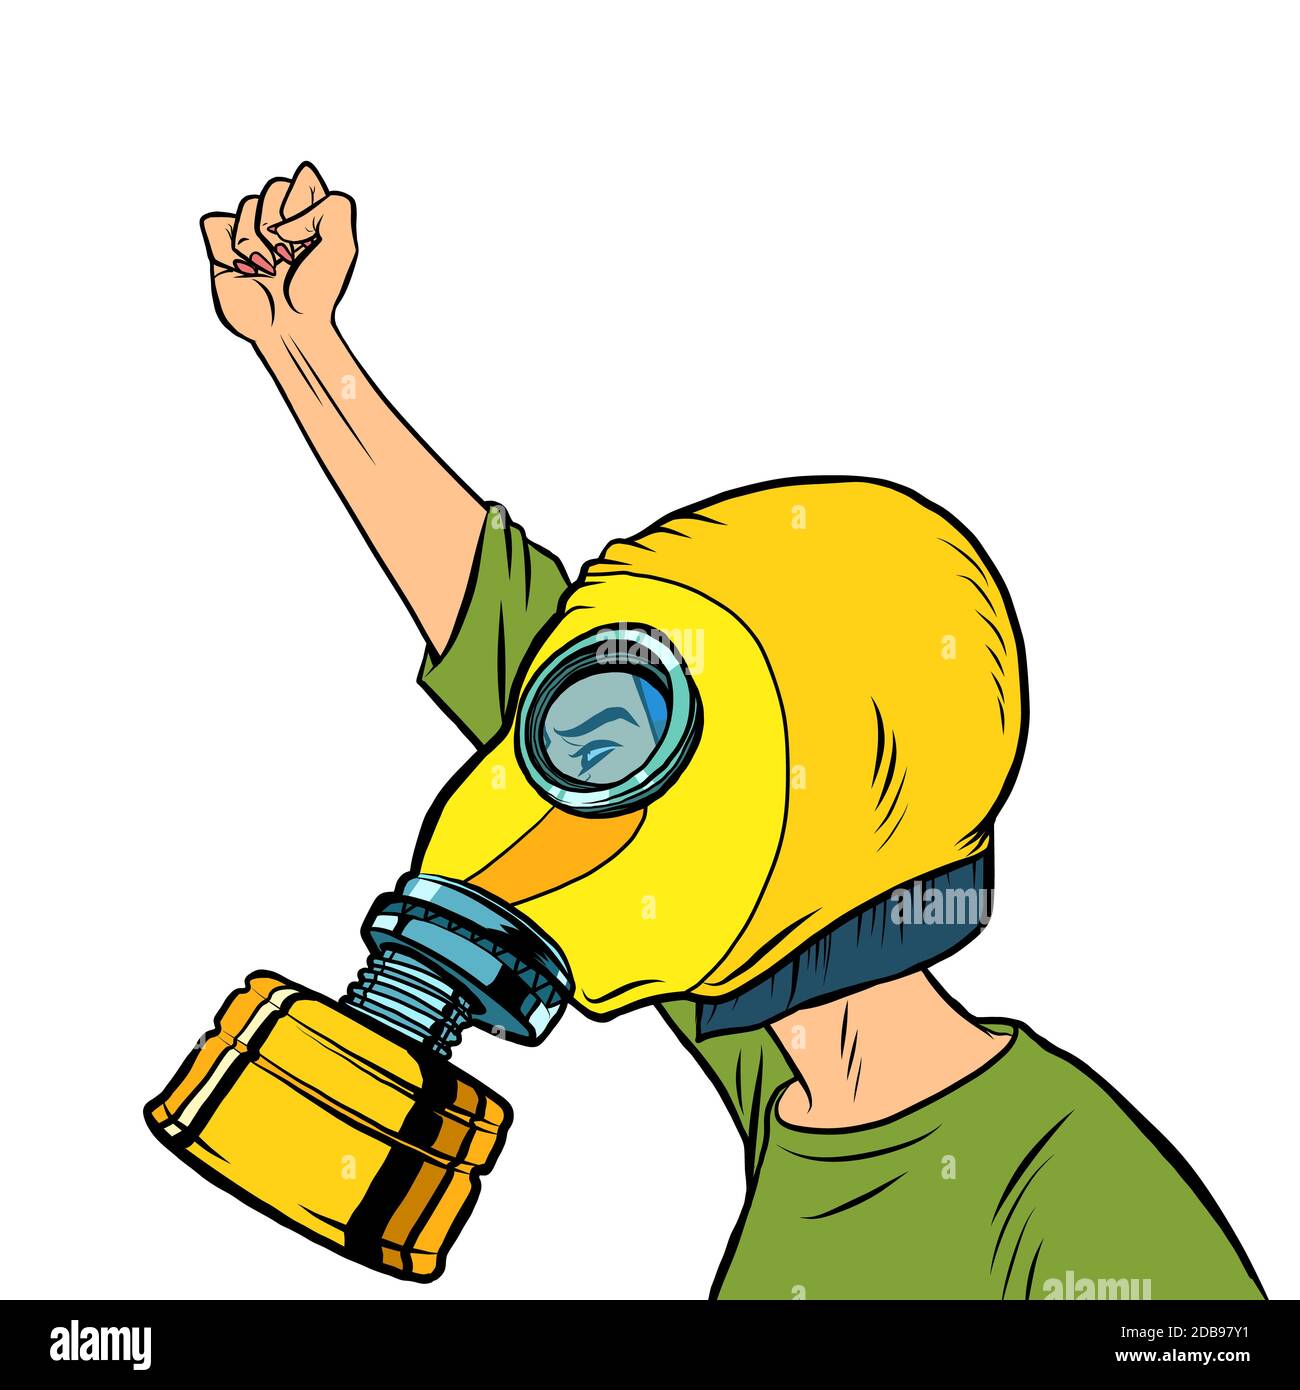 Protester in a gas mask. Protest for clean air. Comics caricature pop art retro illustration drawing Stock Photo